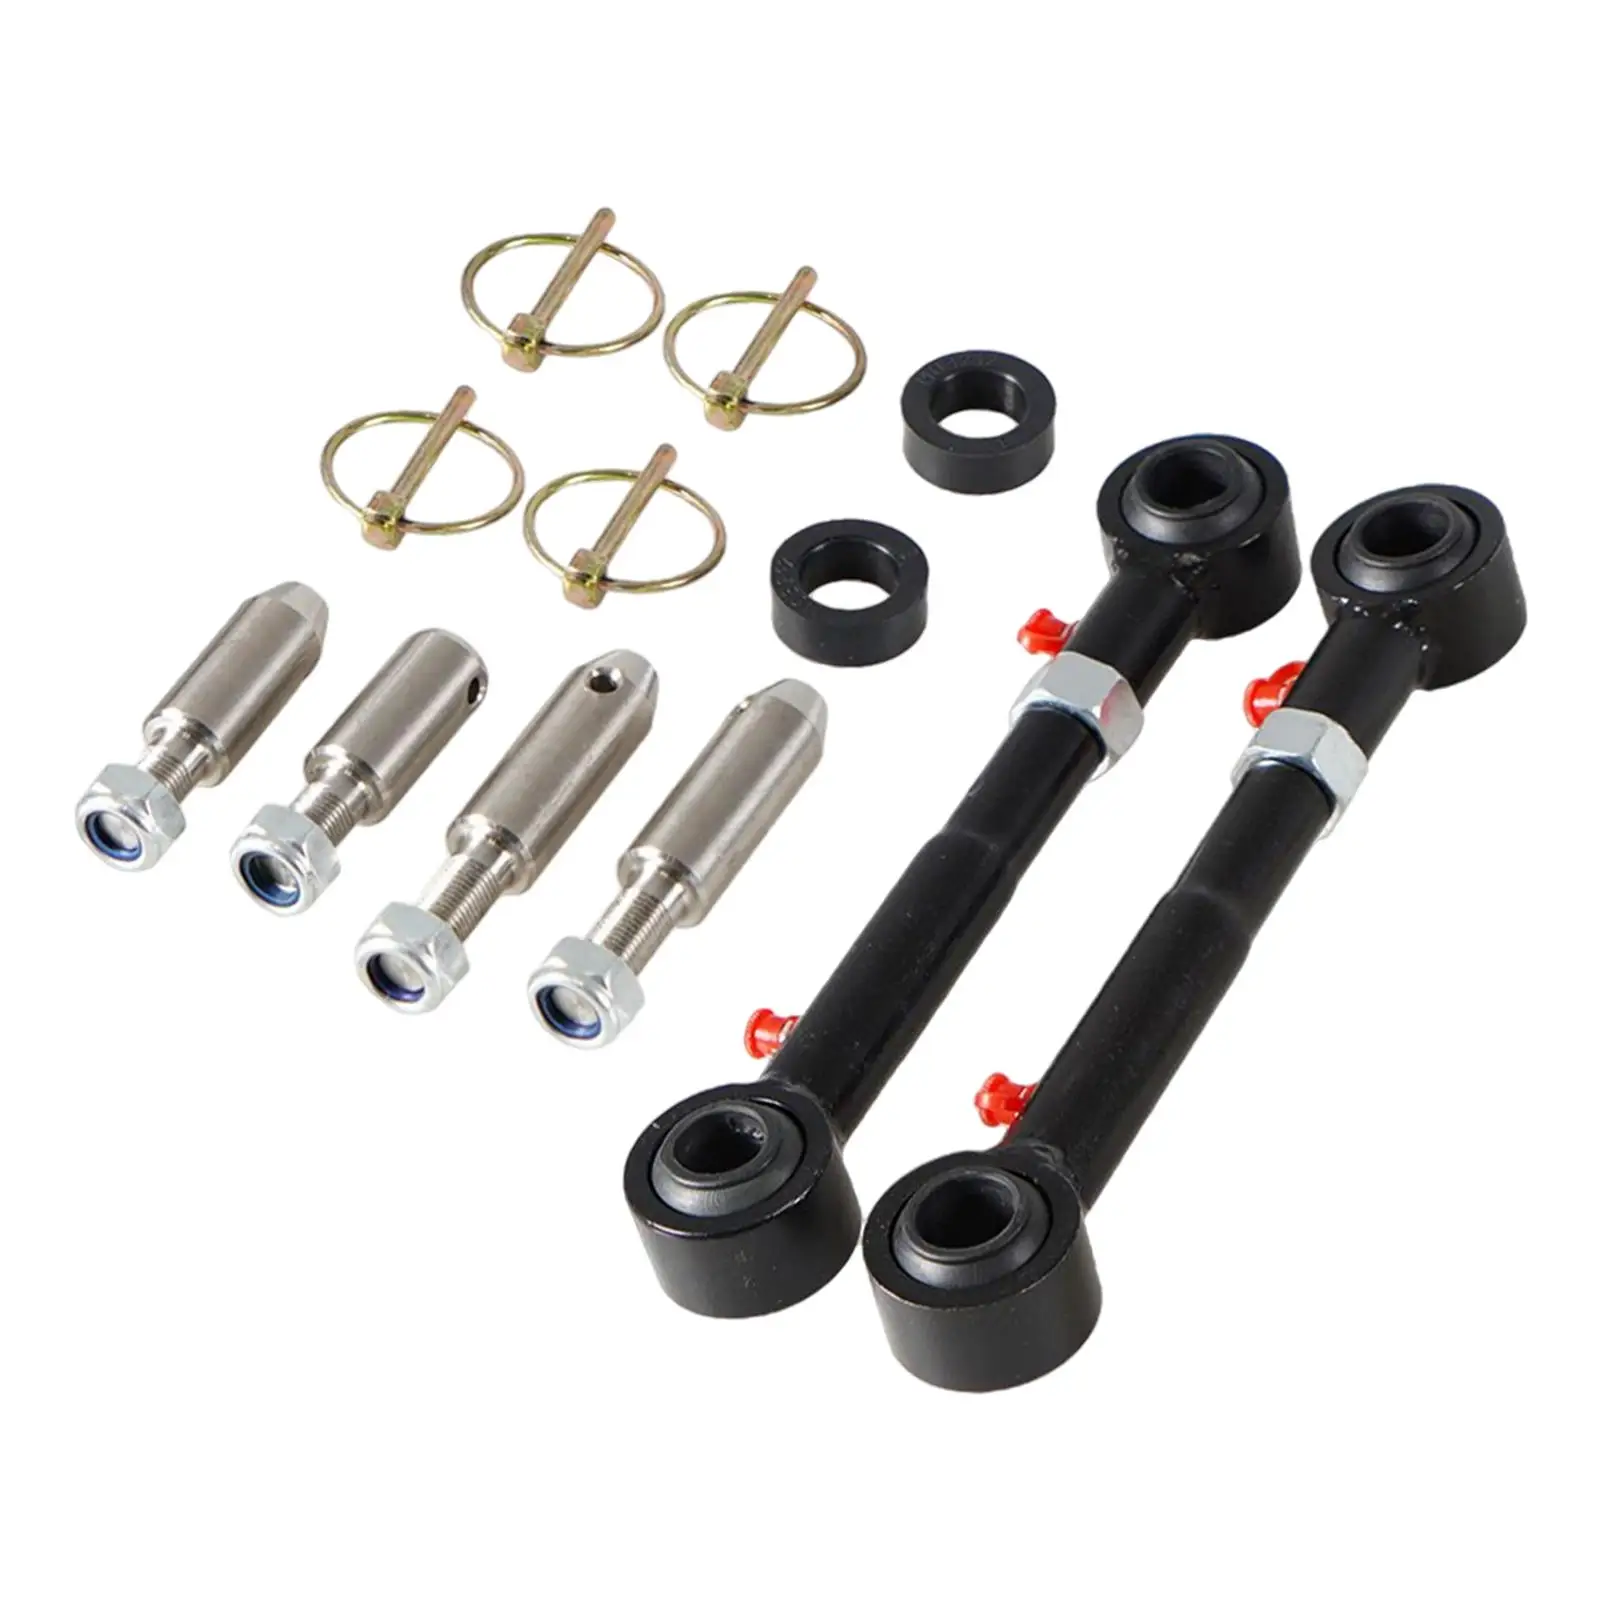 Front Sway Bar Links Disconnects Stainless Steel for Jeep Wrangler JK Jku 07-18 Auto Replaces Parts Stabiliser Bars